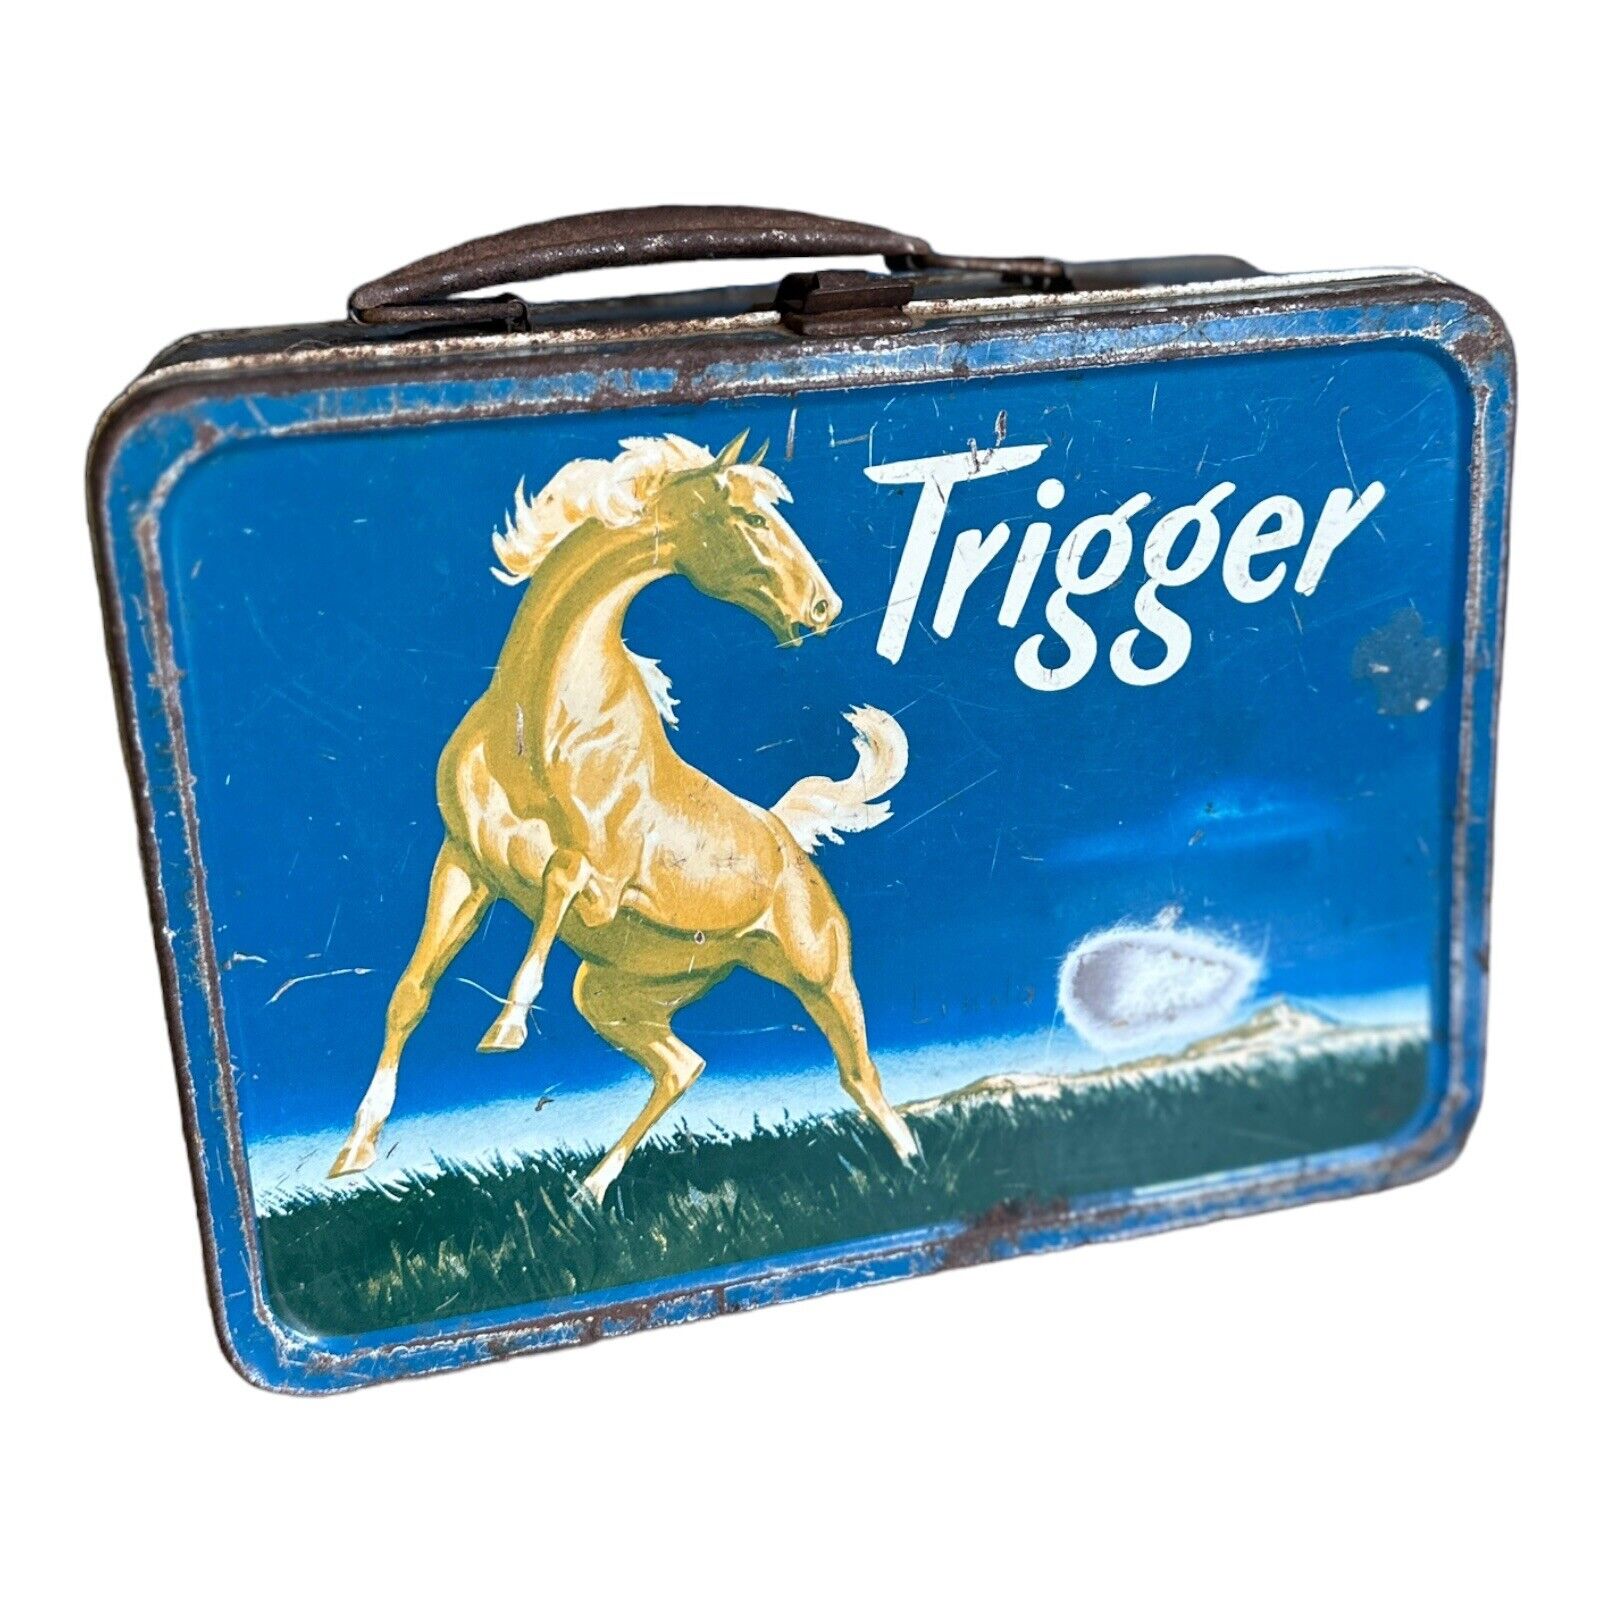 THE AMERICAN THERMOS BOTTLE CO TRIGGER LUNCH BOX